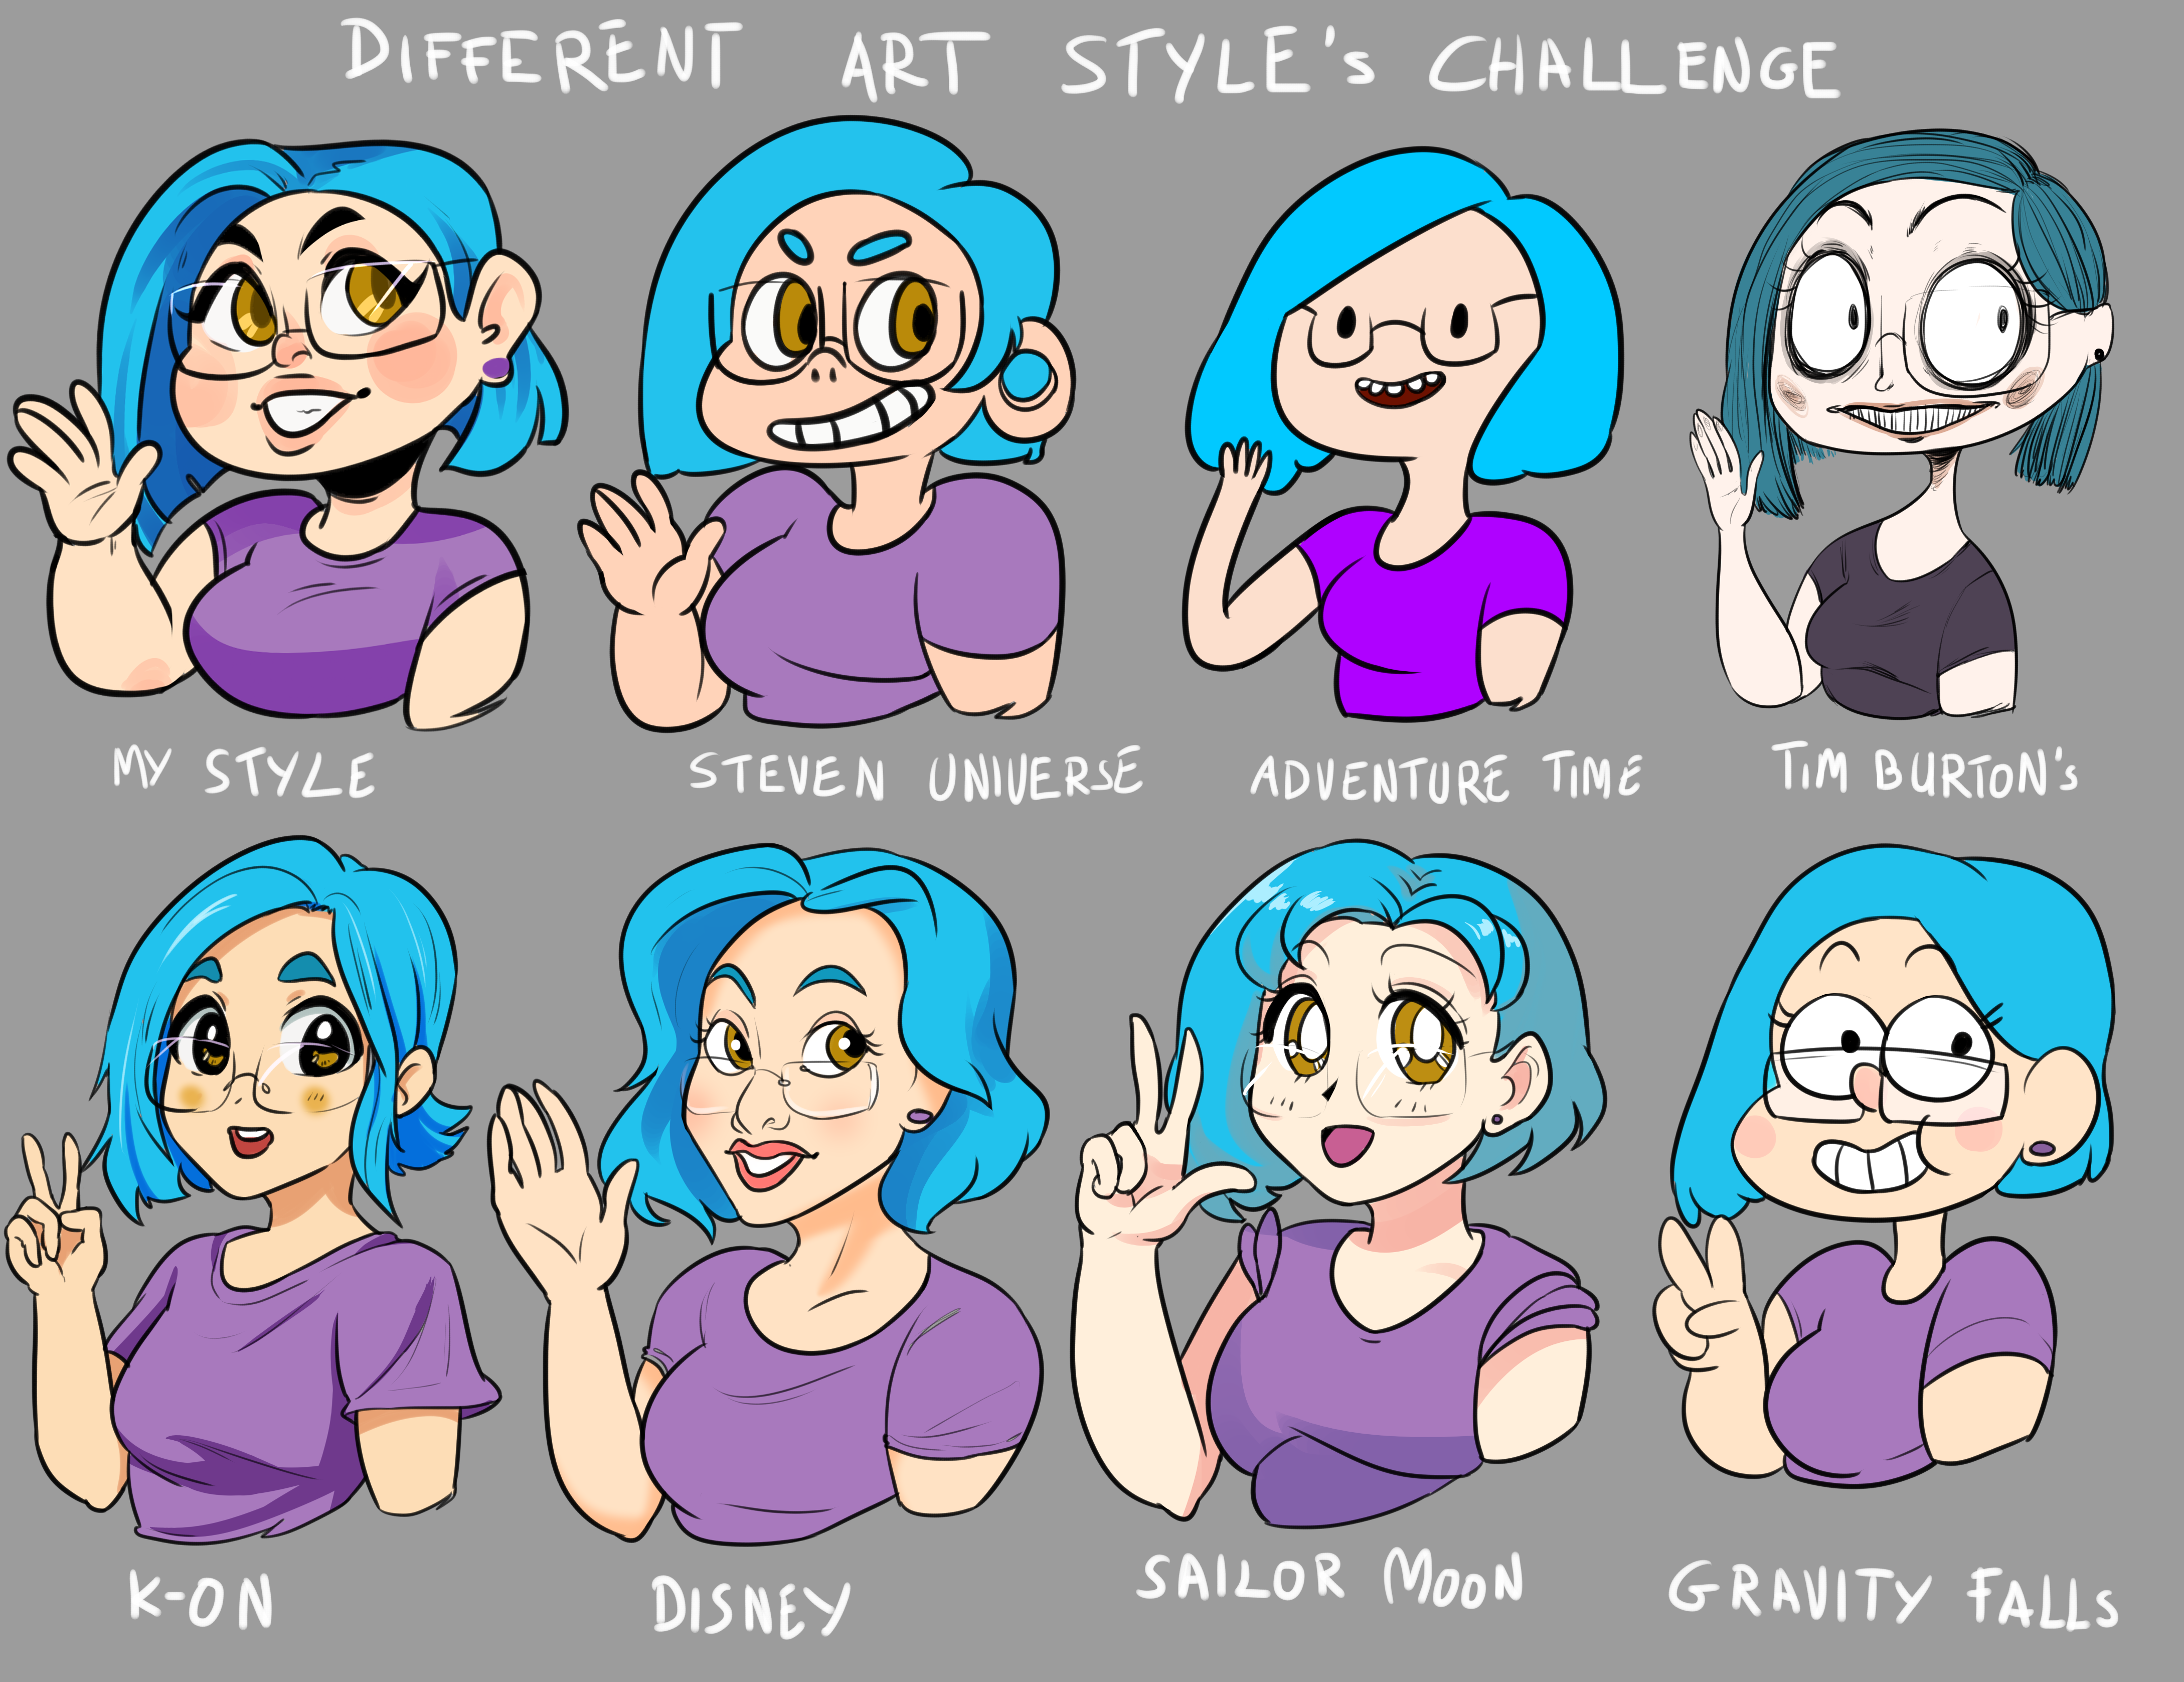 Art style challenge, Different art styles, Different drawing styles